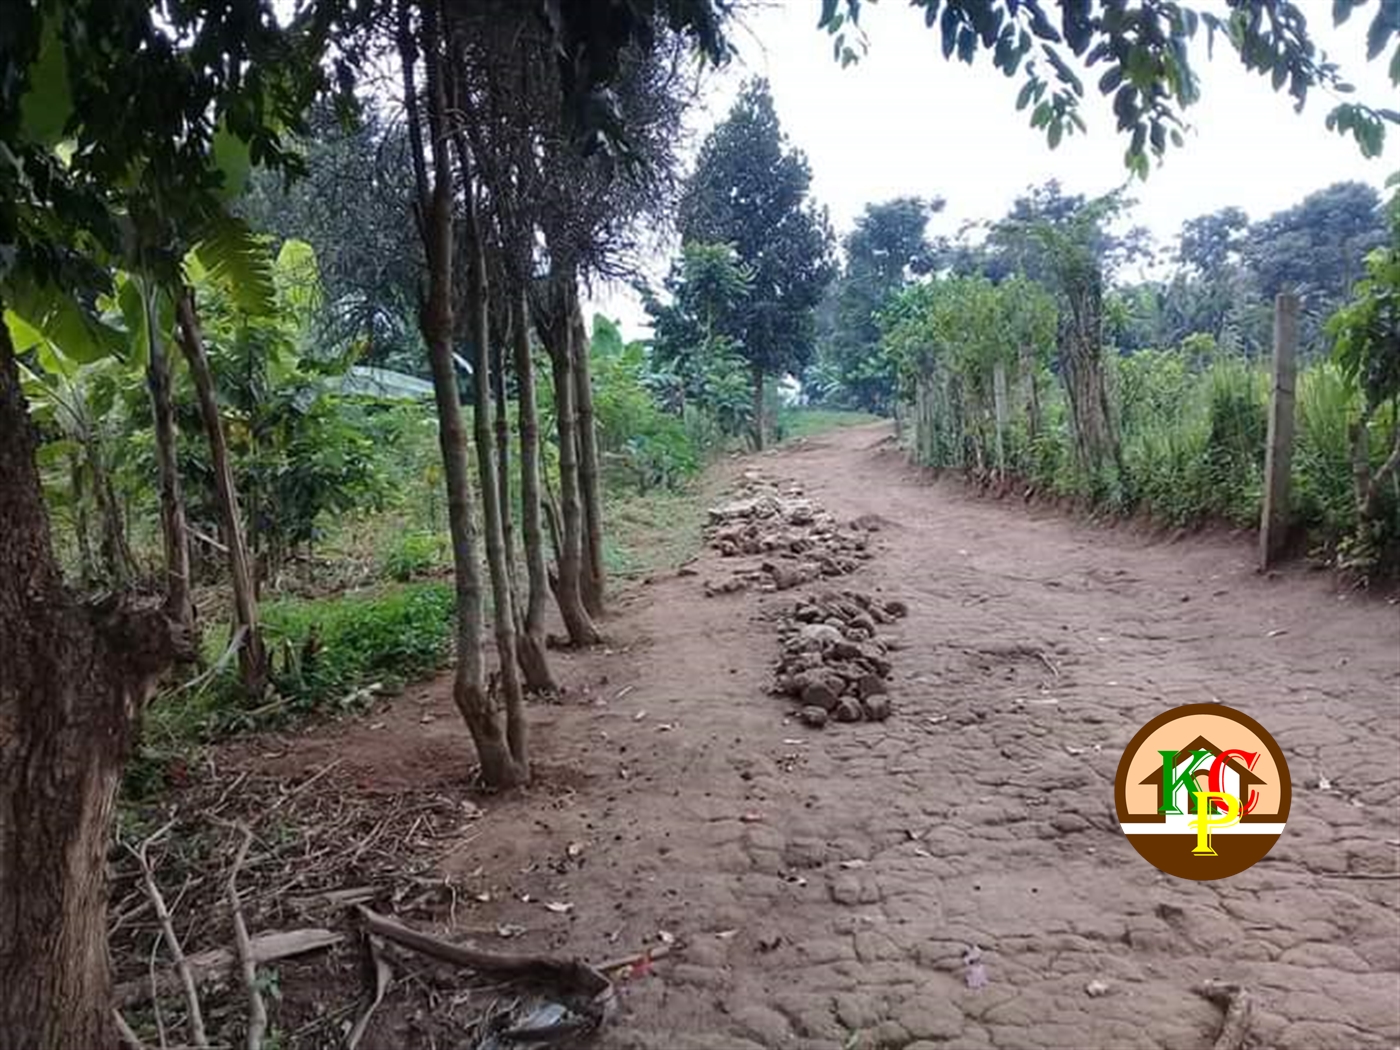 Residential Land for sale in Mpereerwe Kampala